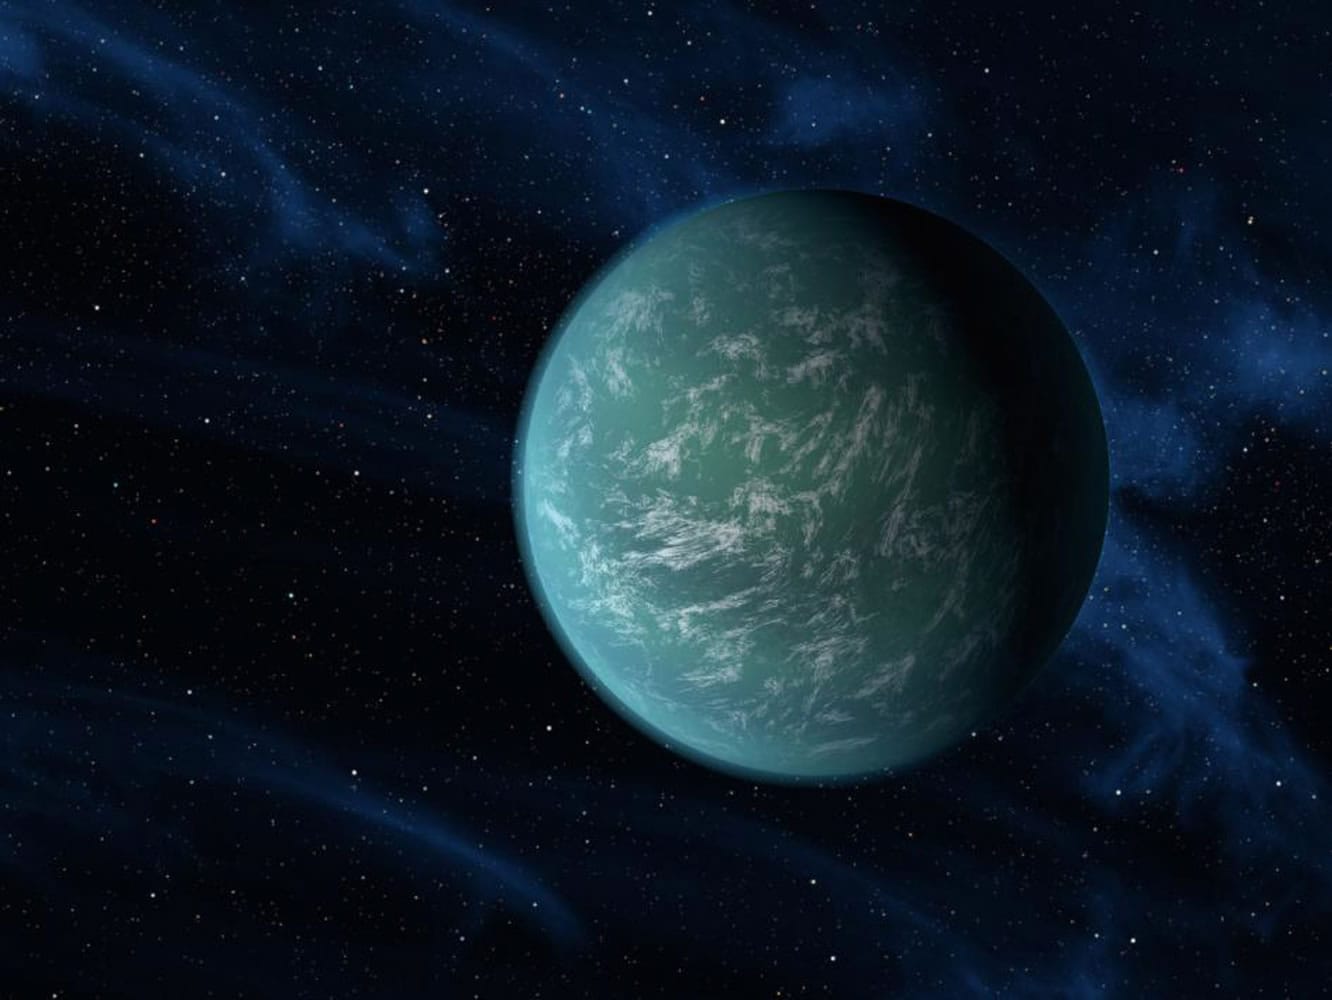 Kepler-22b is a planet known to comfortably circle in the habitable zone of a sun-like star.